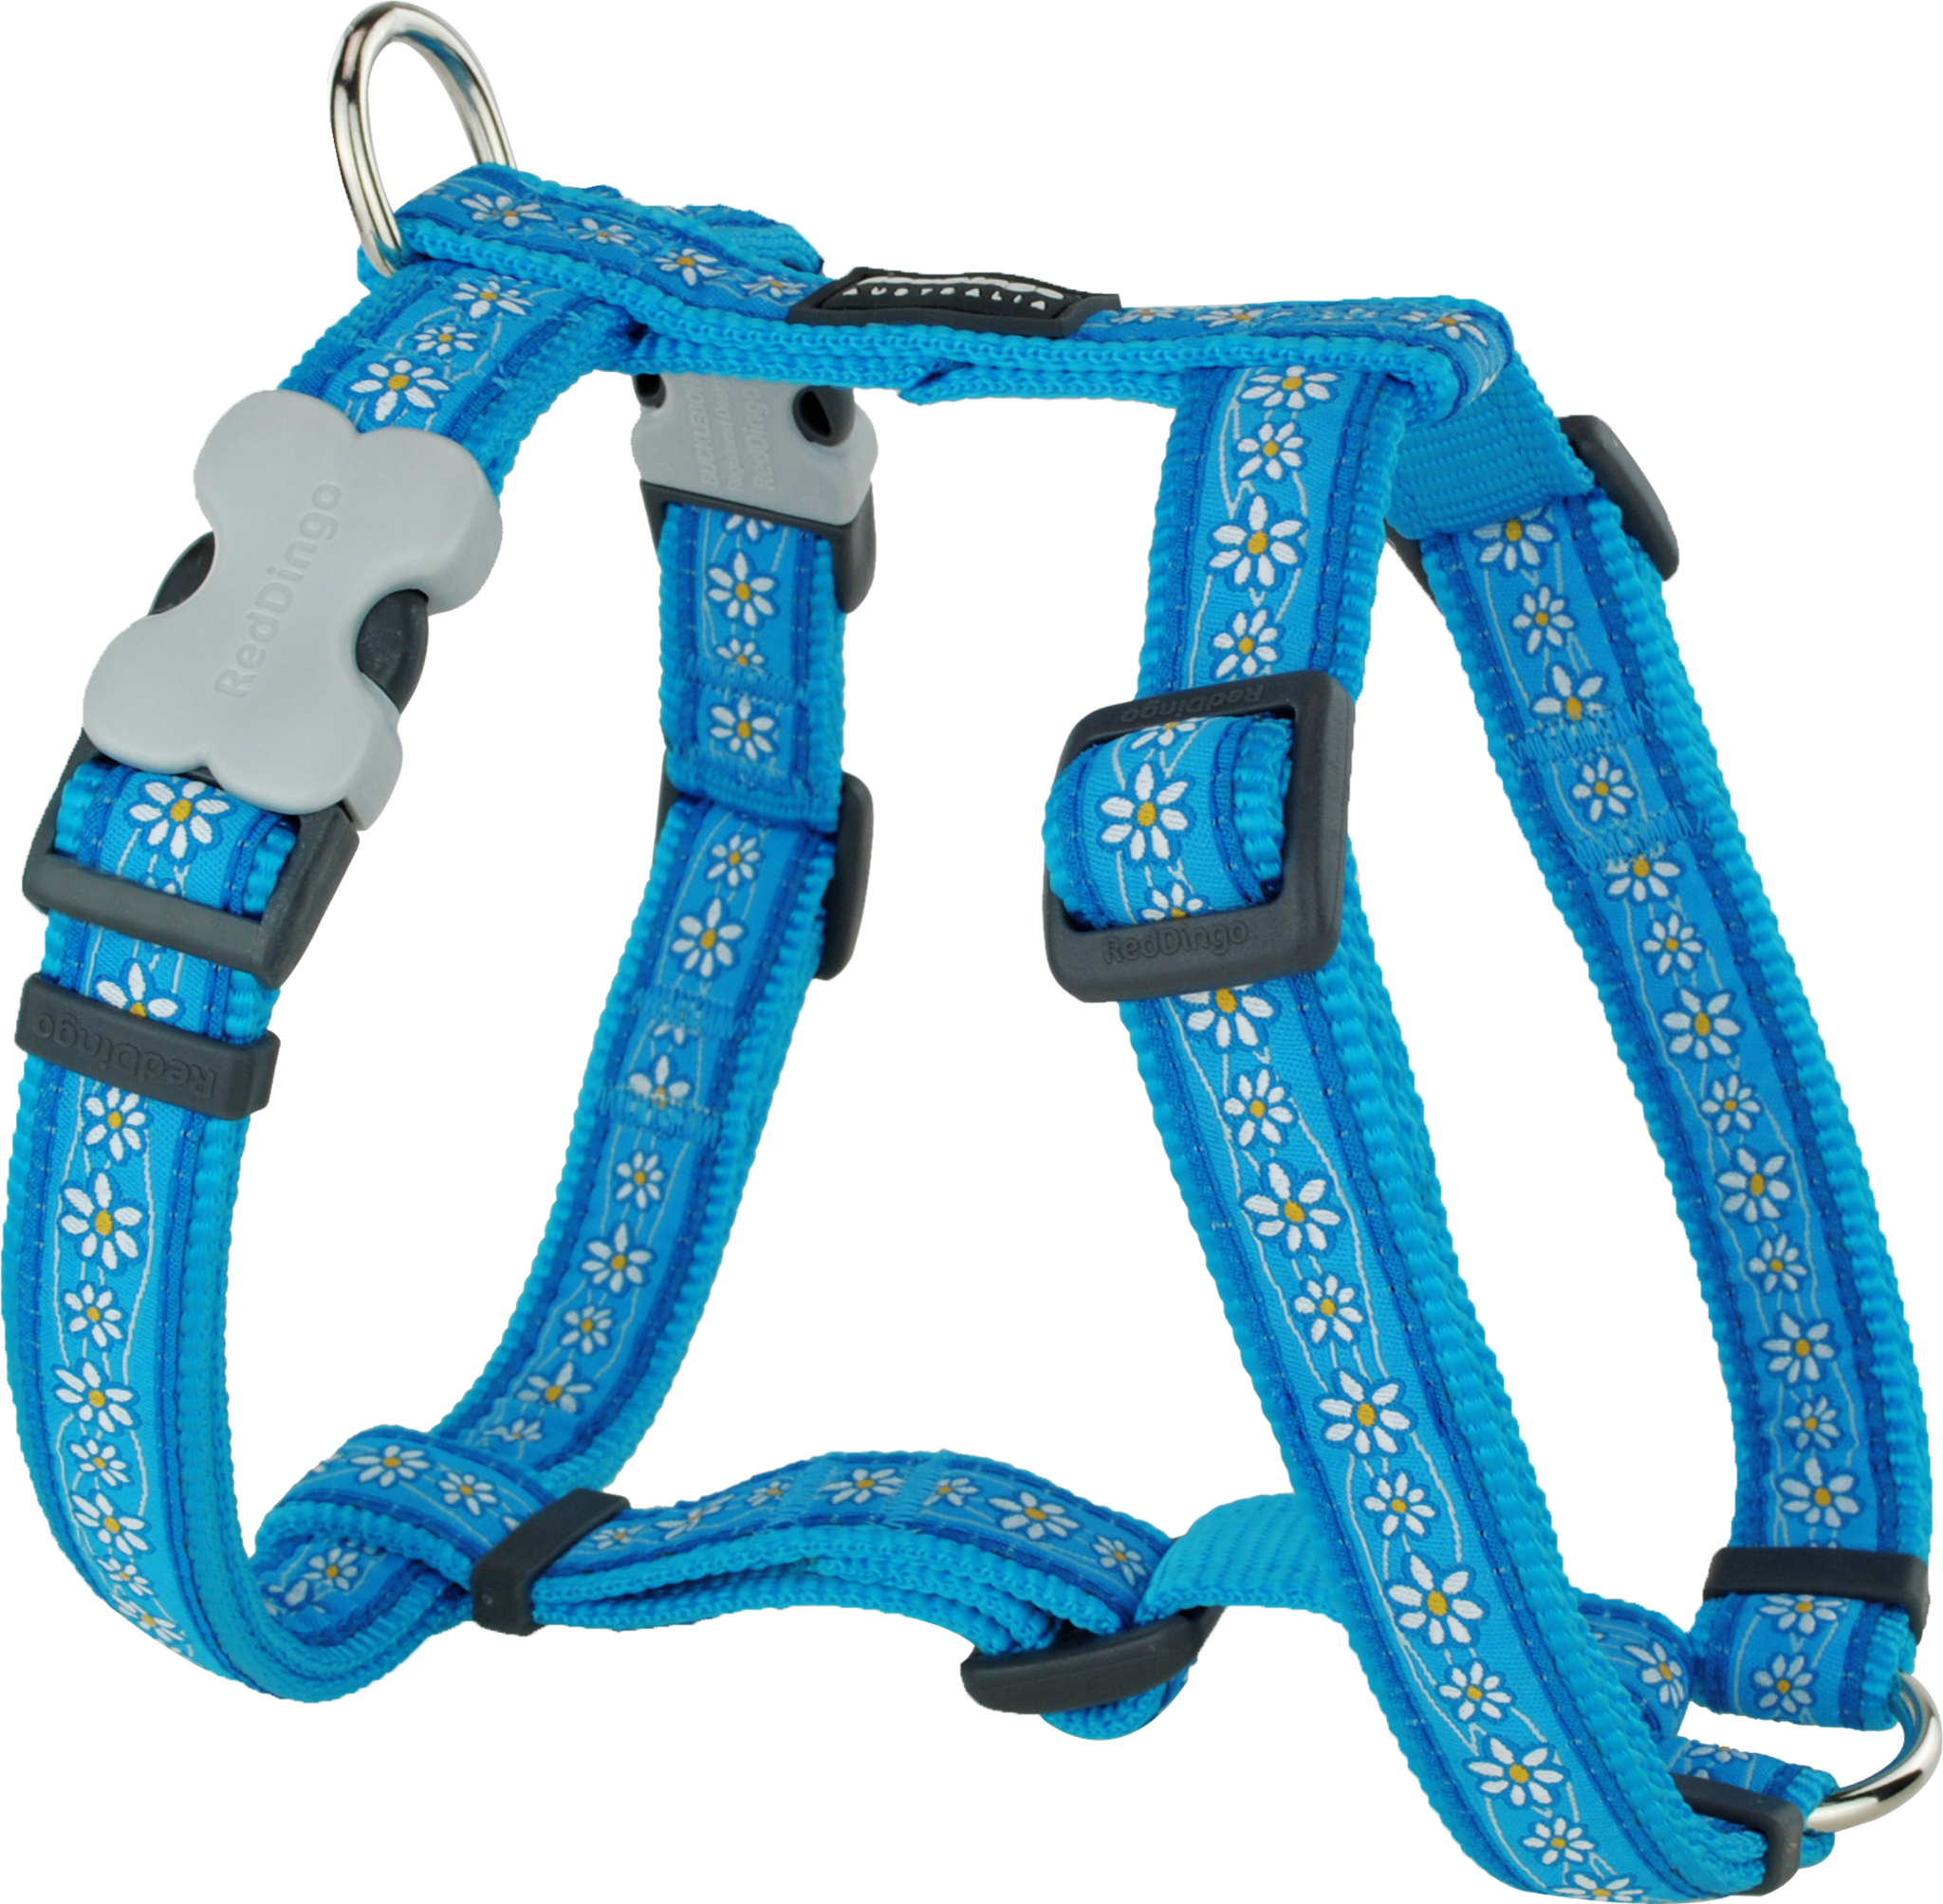 Red Dingo Designer Dog Harness - Daisy Chain (Turquoise)